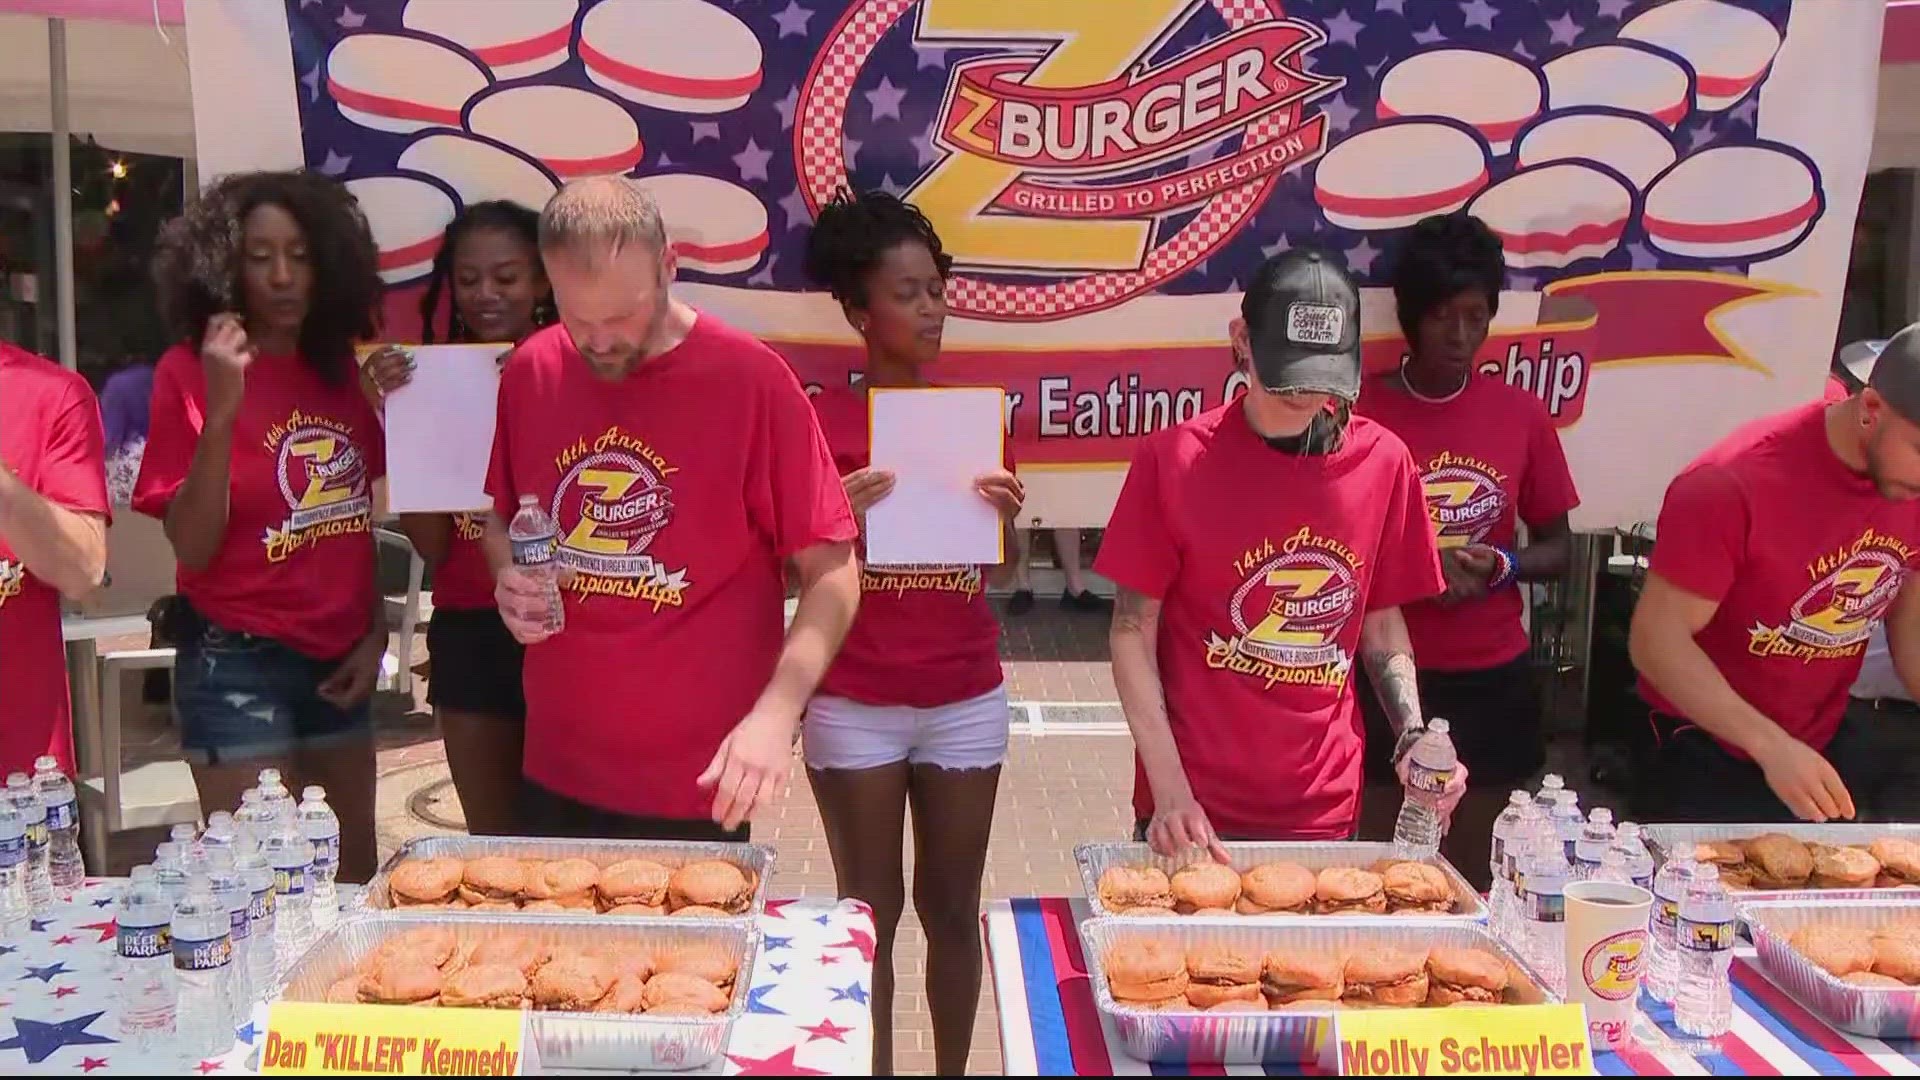 Cheered on by a large crowd, Molly Schuyler claimed her 9th trophy, devouring 34 burgers in 10 minutes to win the 14th Annual Z-Burger Championship.